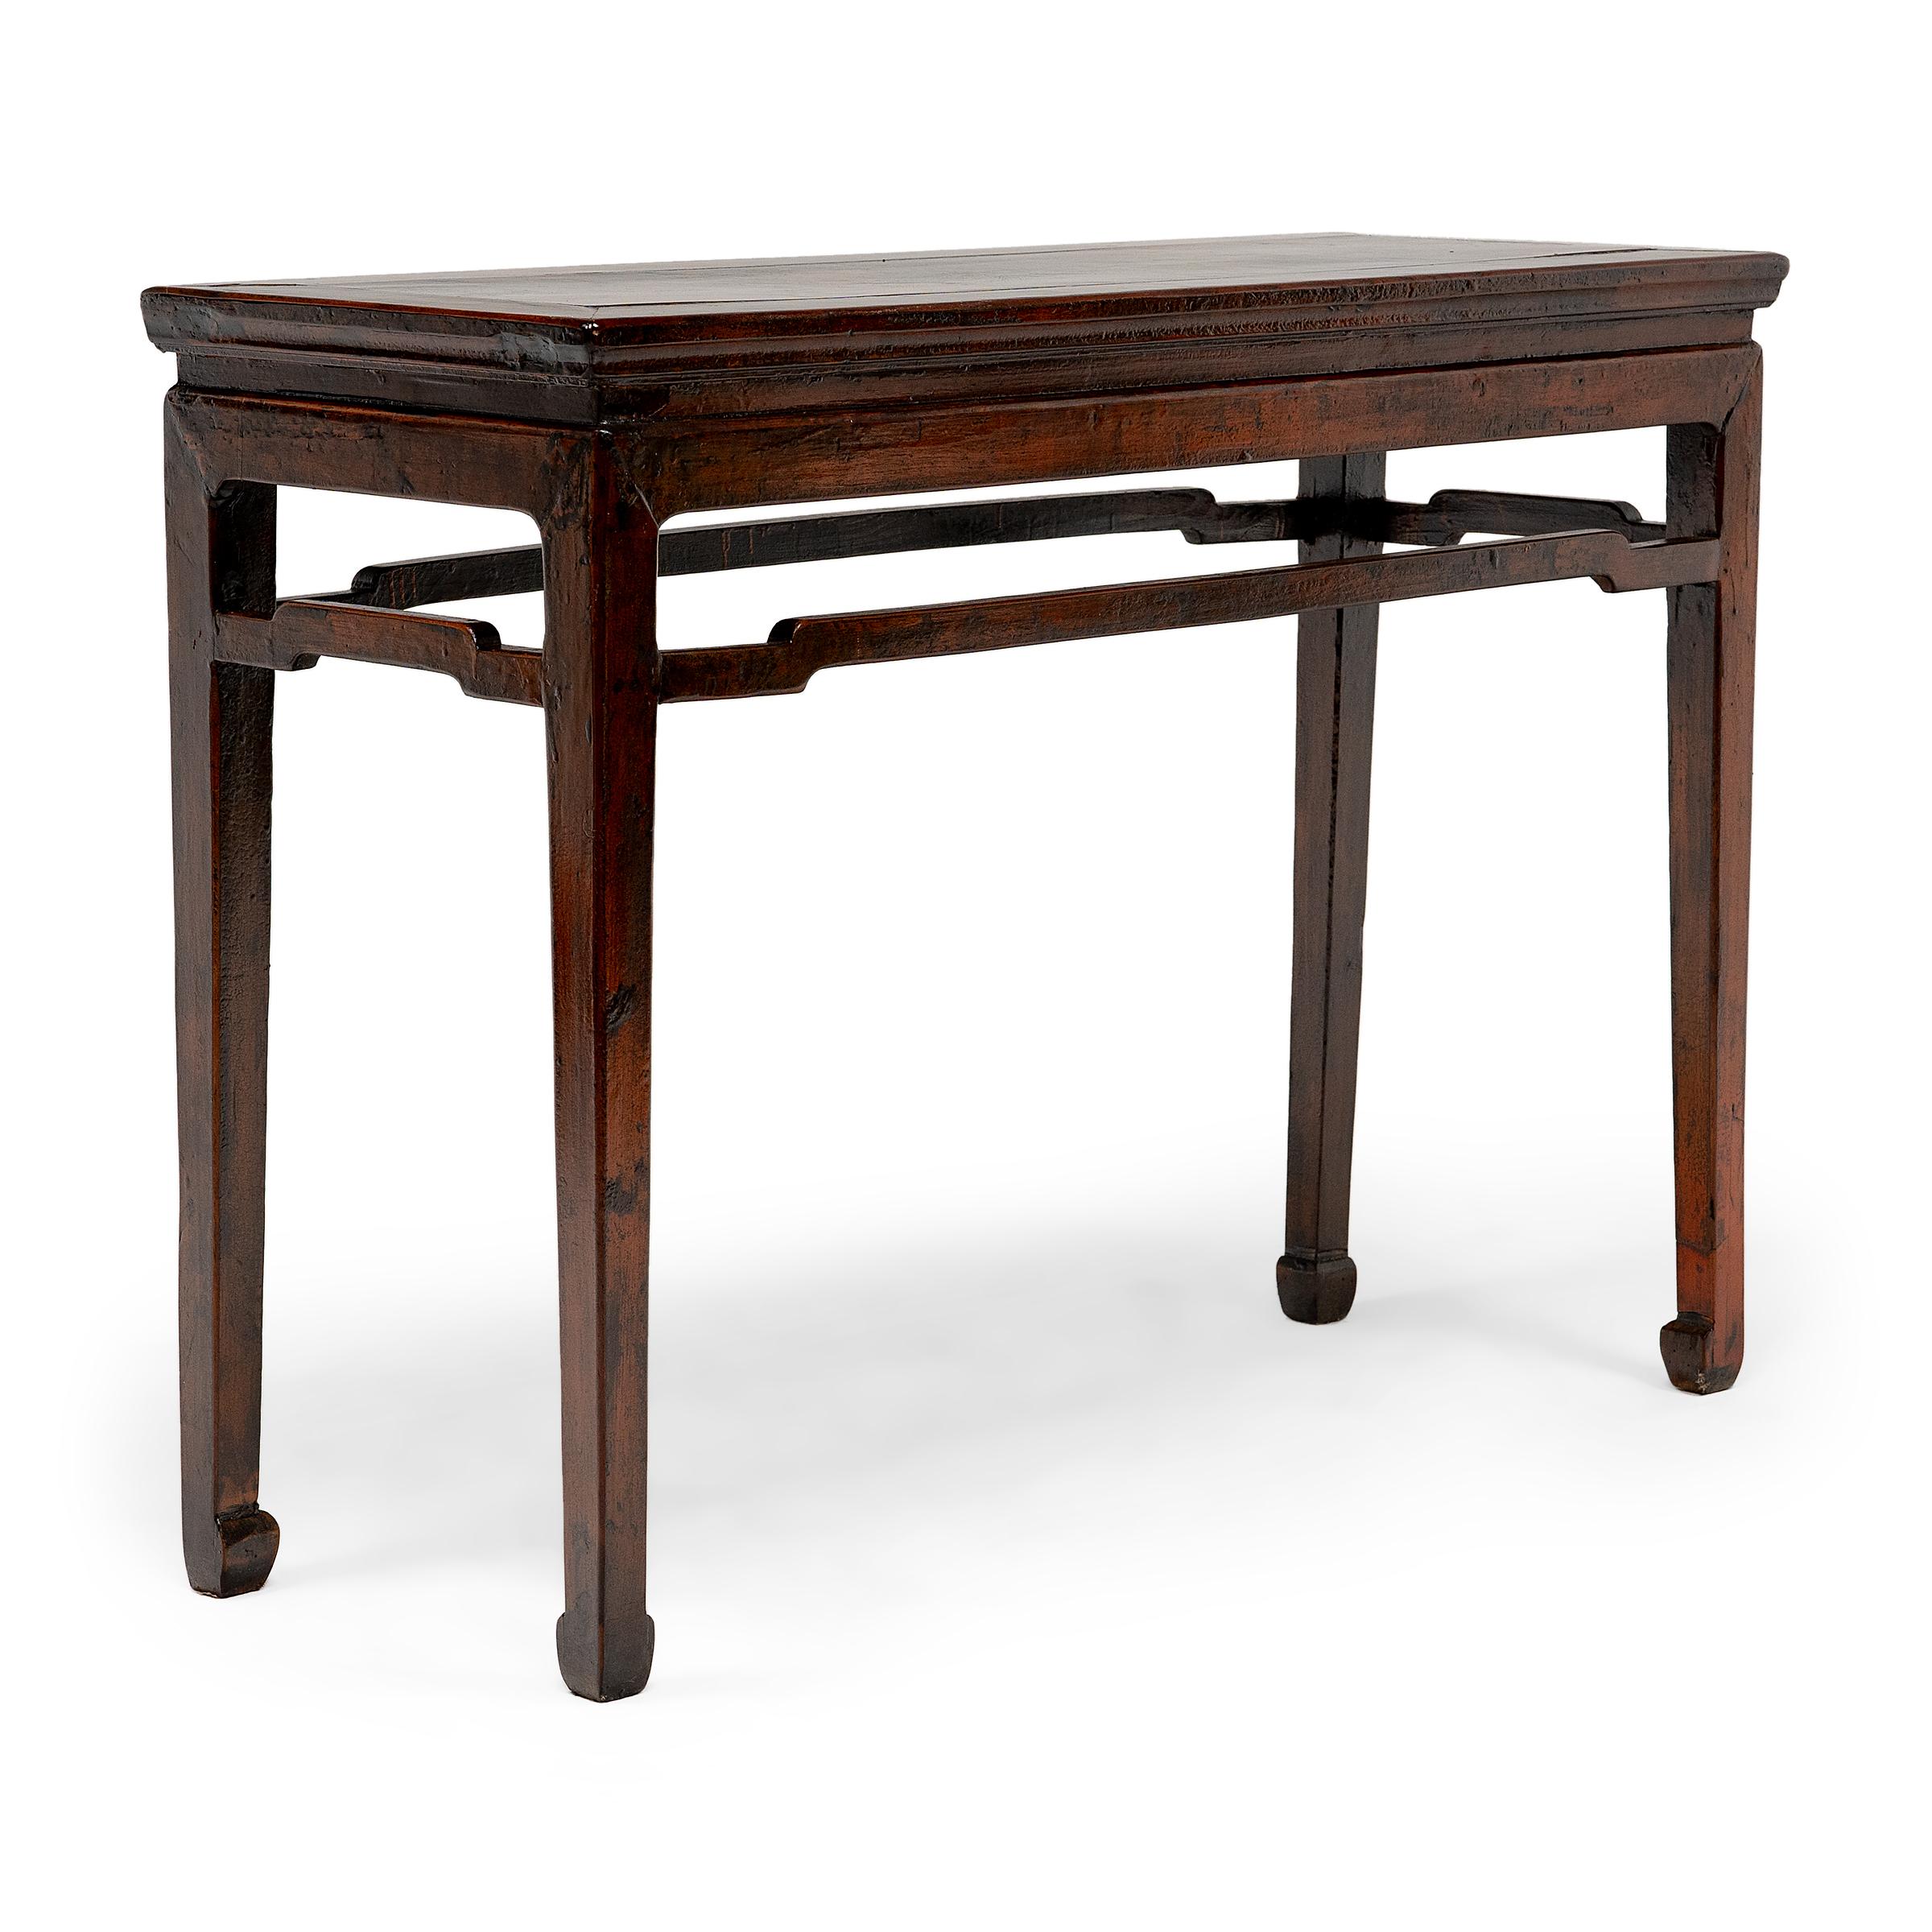 Perfected in the Ming dynasty, complex joinery techniques allowed craftsmen to create furniture with flowing lines, a sense of lightness, and remarkable durability. Crafted with pine, this 20th-century offering table is a beautiful example of this